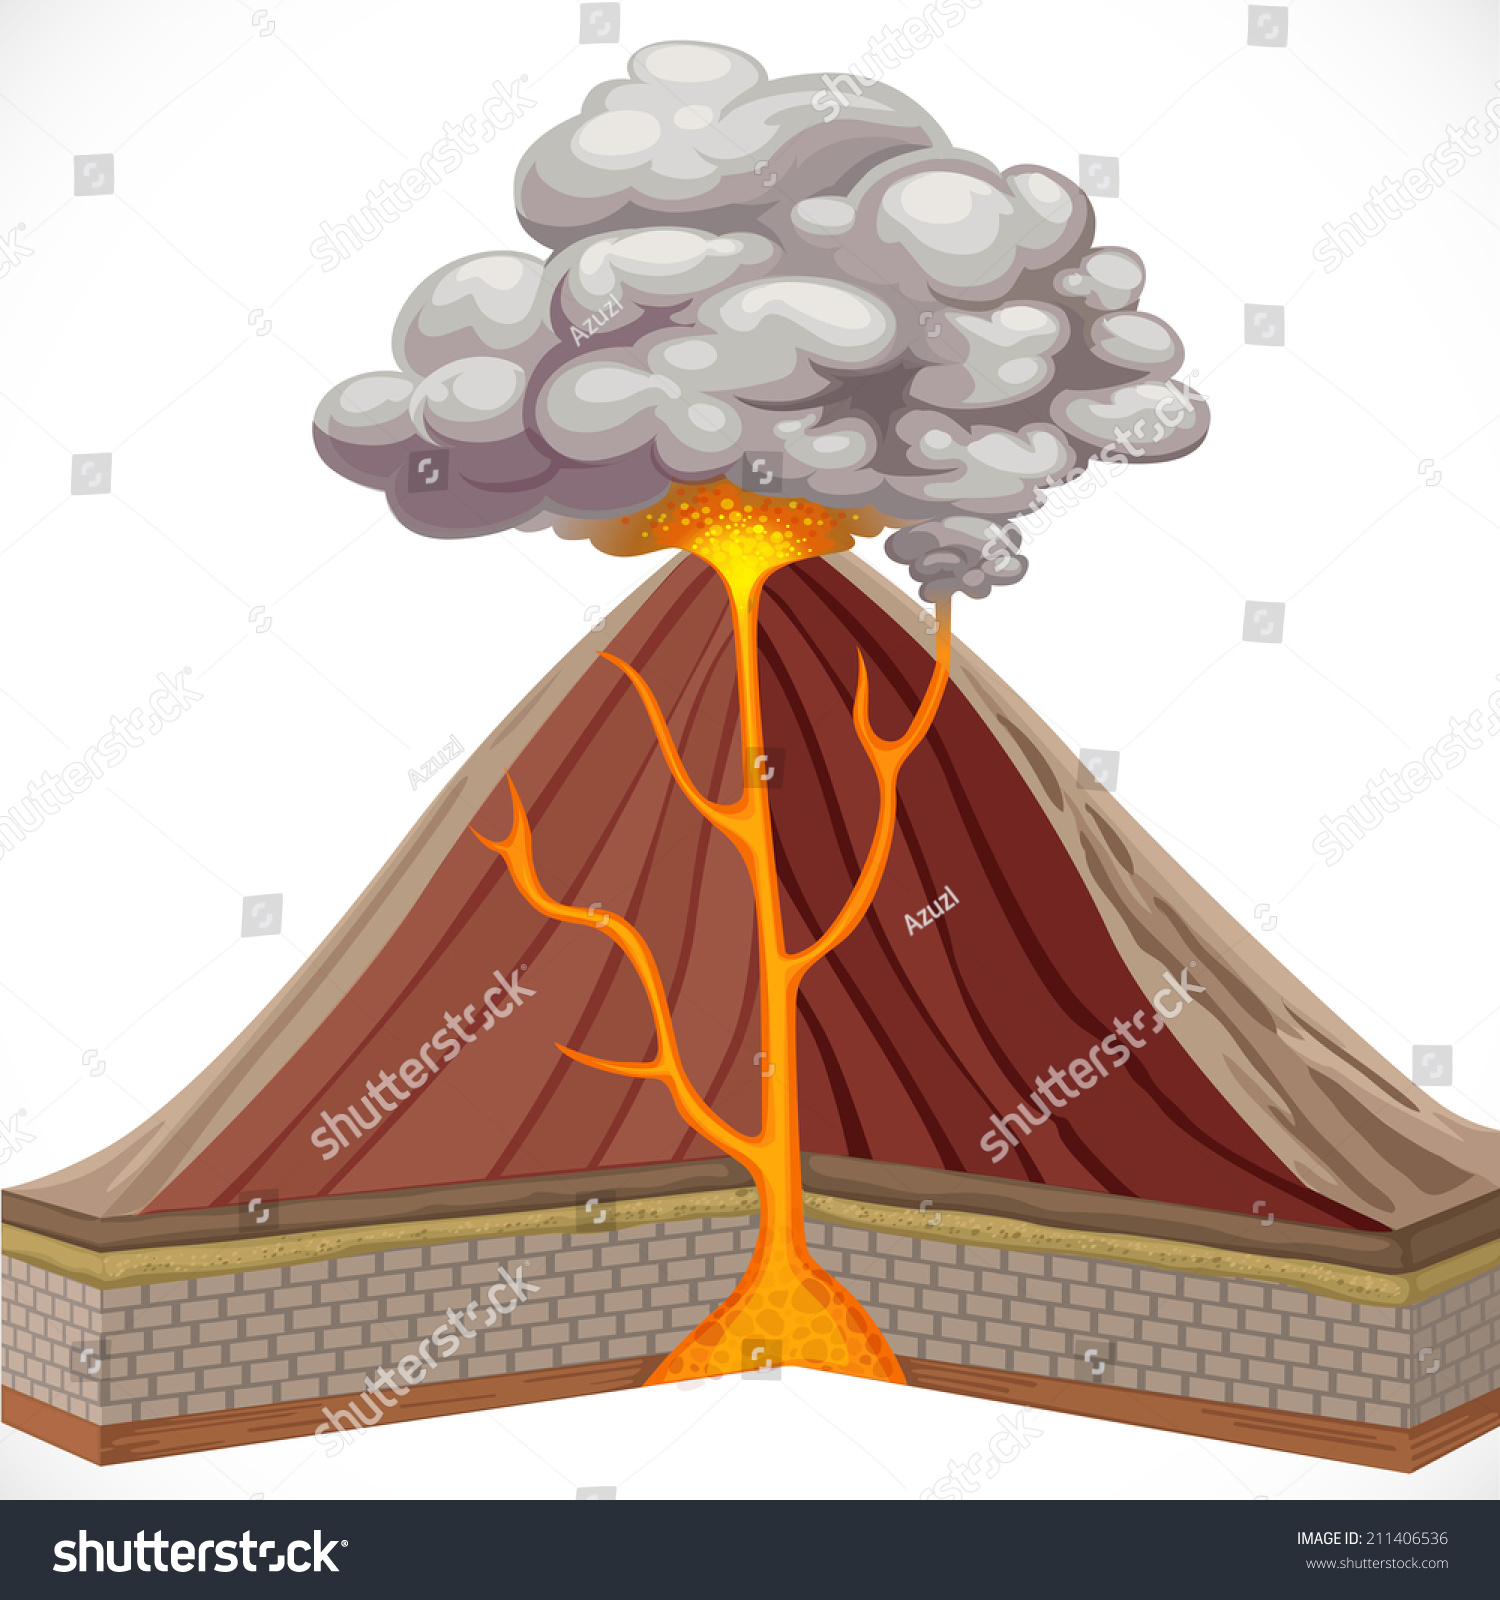 Diagram Volcano Eruption Image collections - How To Guide 